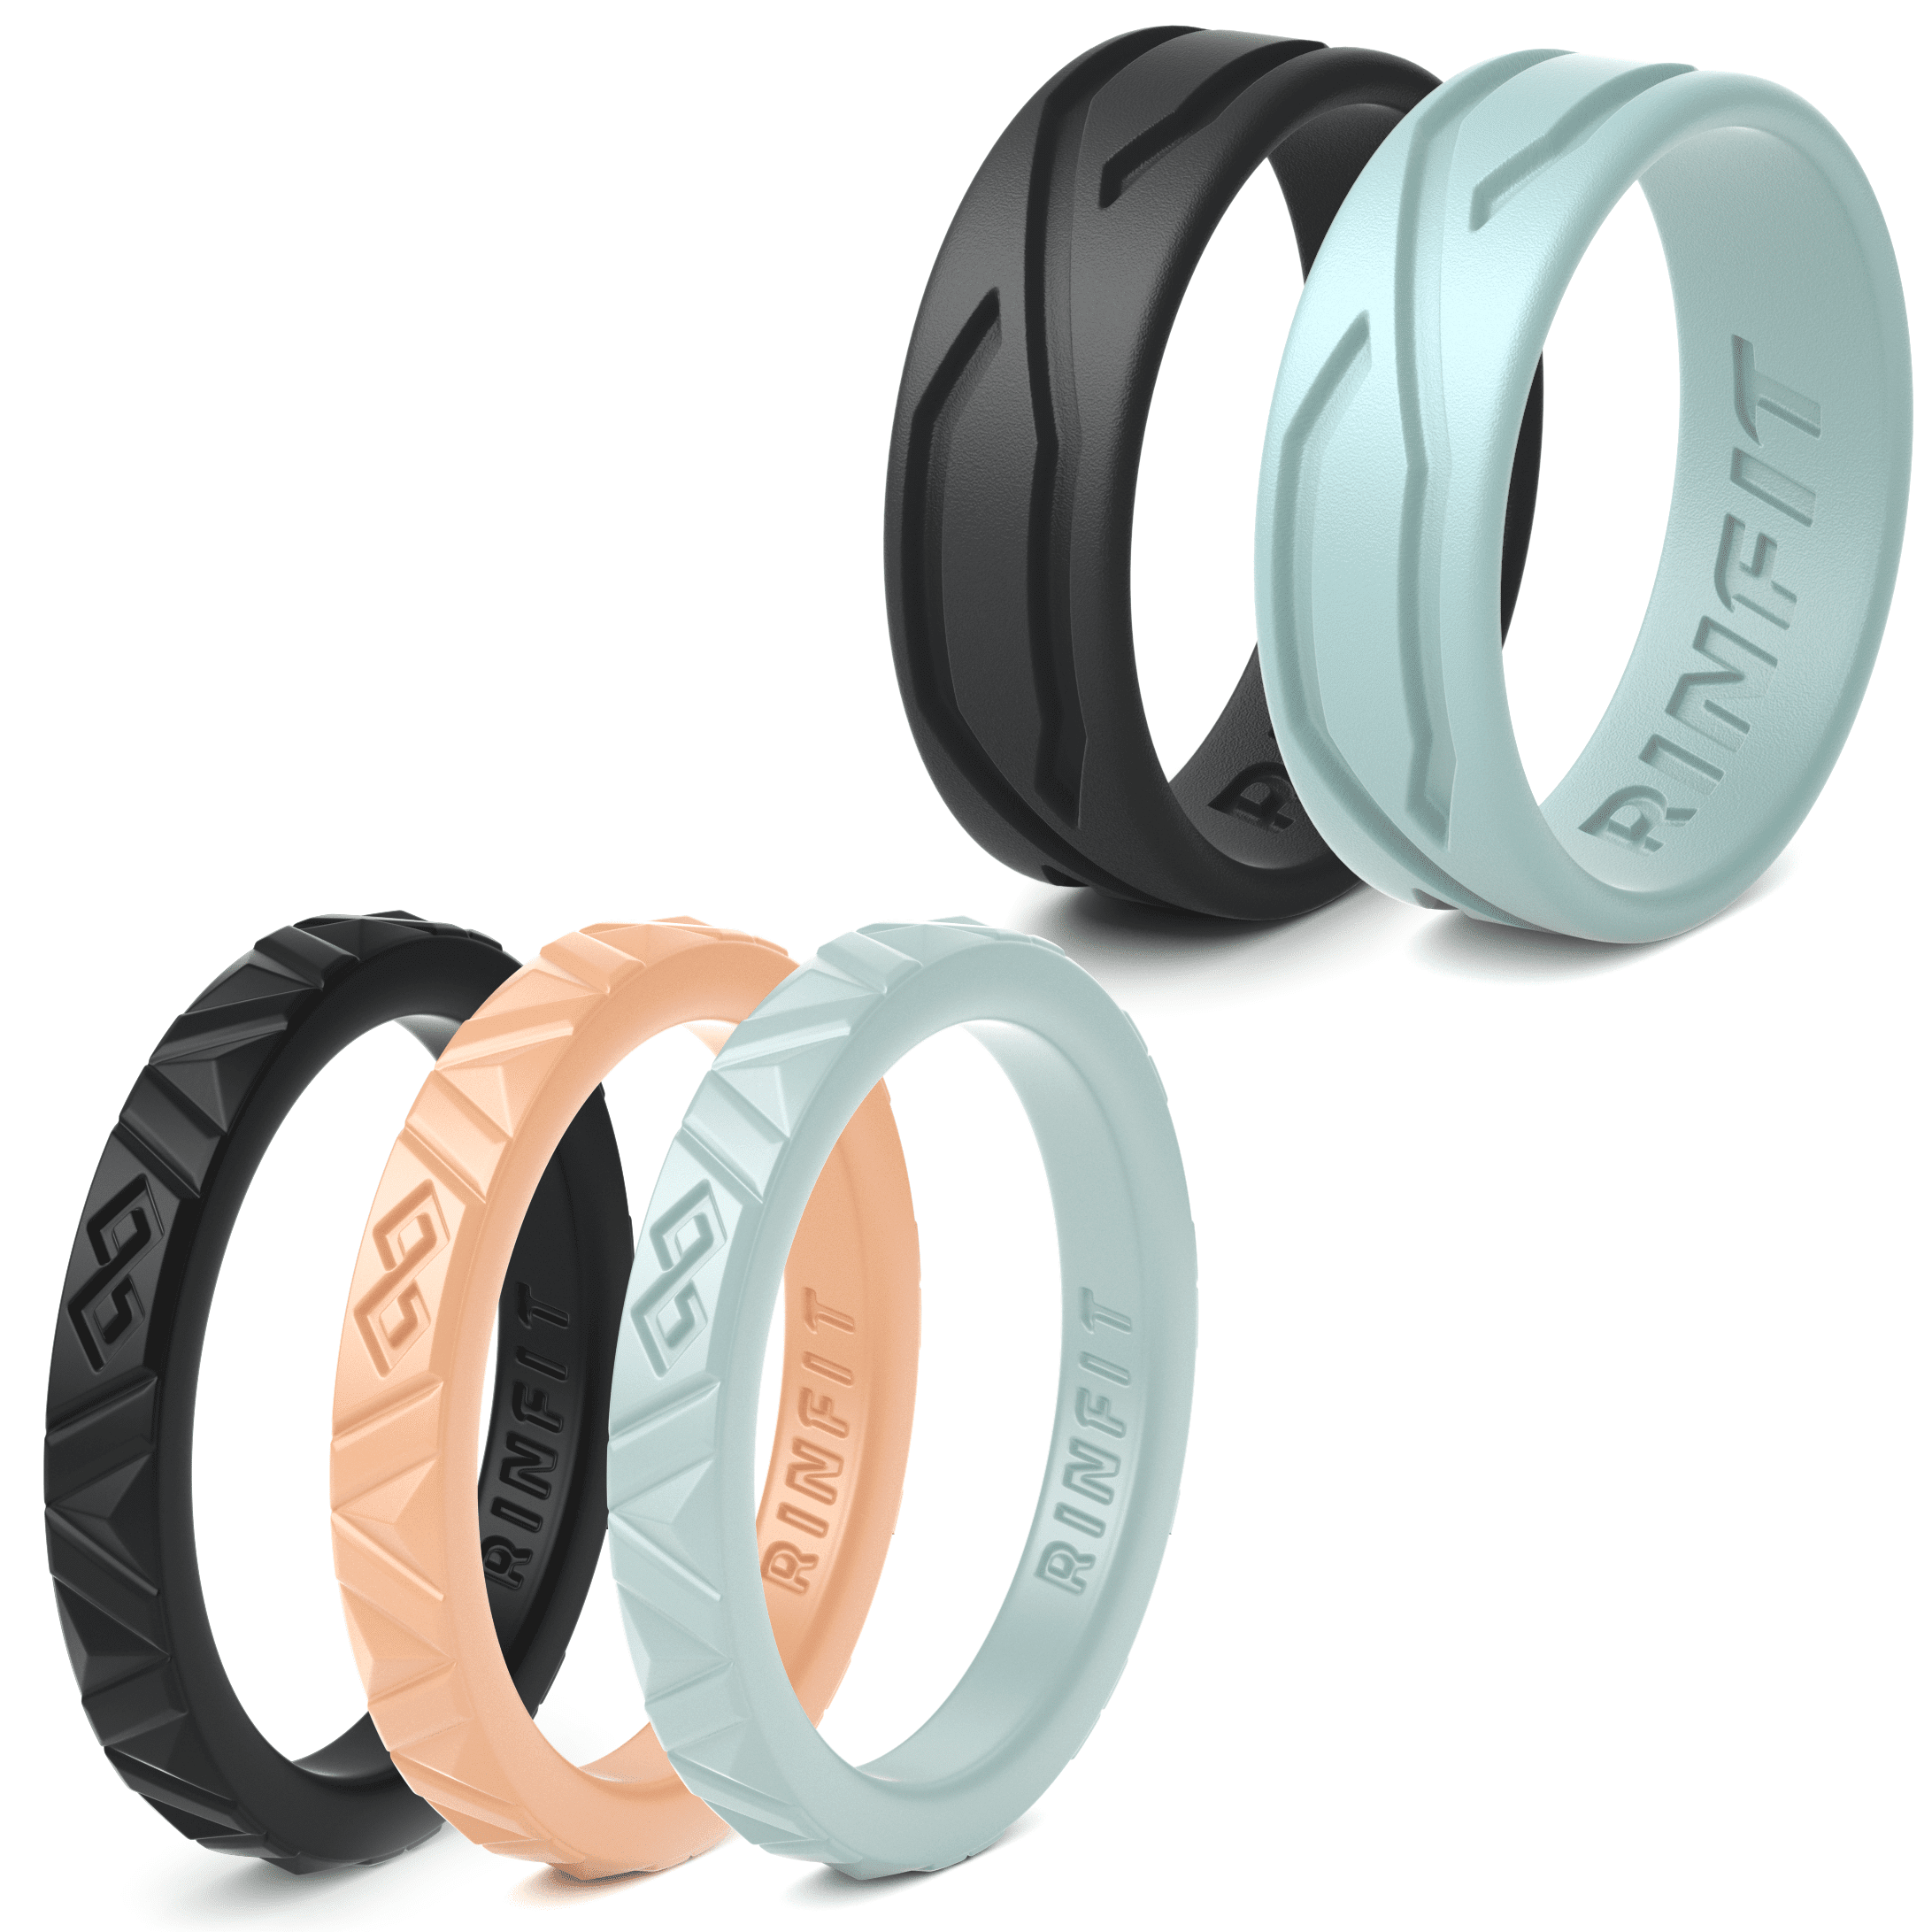 women's silicone wedding ring -5 Rings Pack -Mix Collection Rinfit Designed  Silicone Rubber Ring. Thin 2.5 / 5.5 mm wide - Thin rubber Wedding Bands